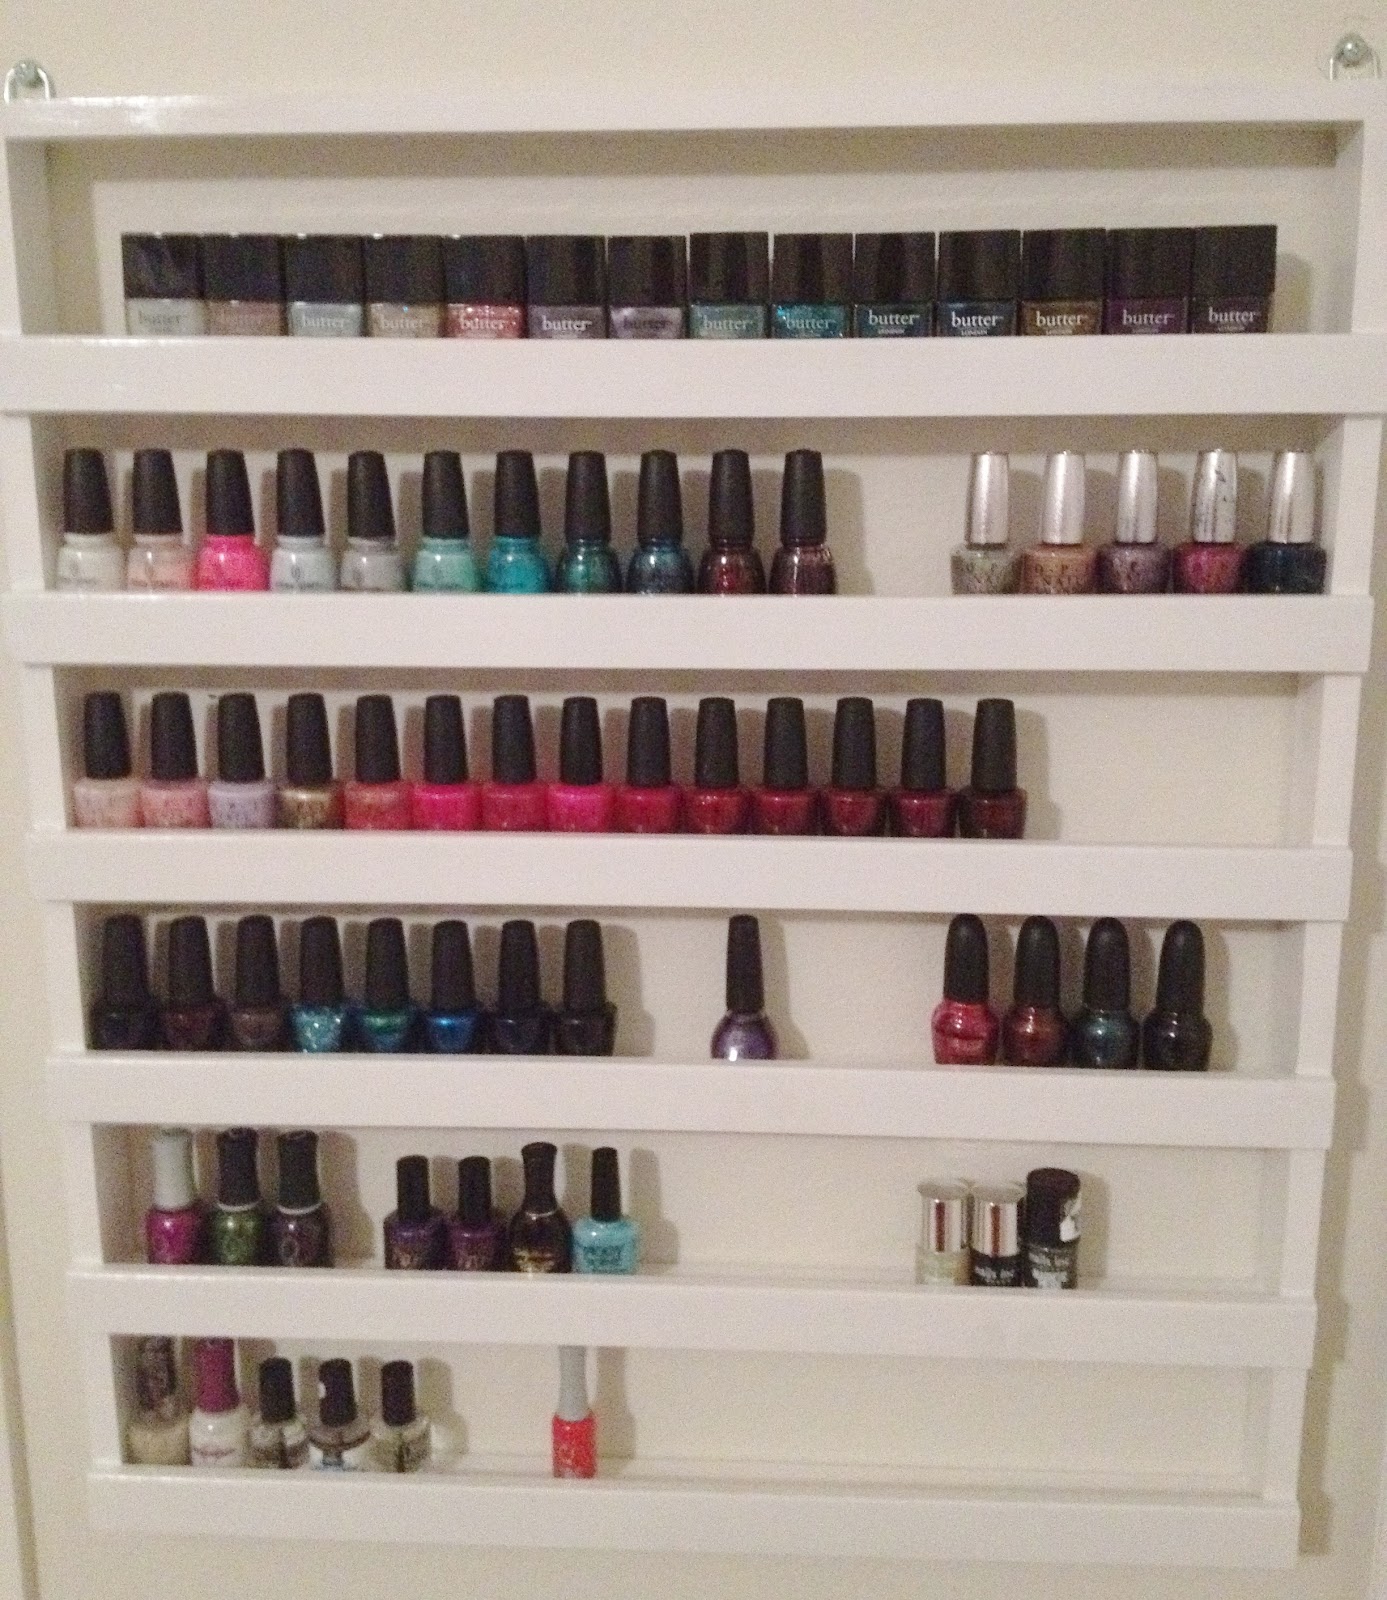 Where do you currently store your nail polish? Shamefully stuffed into a